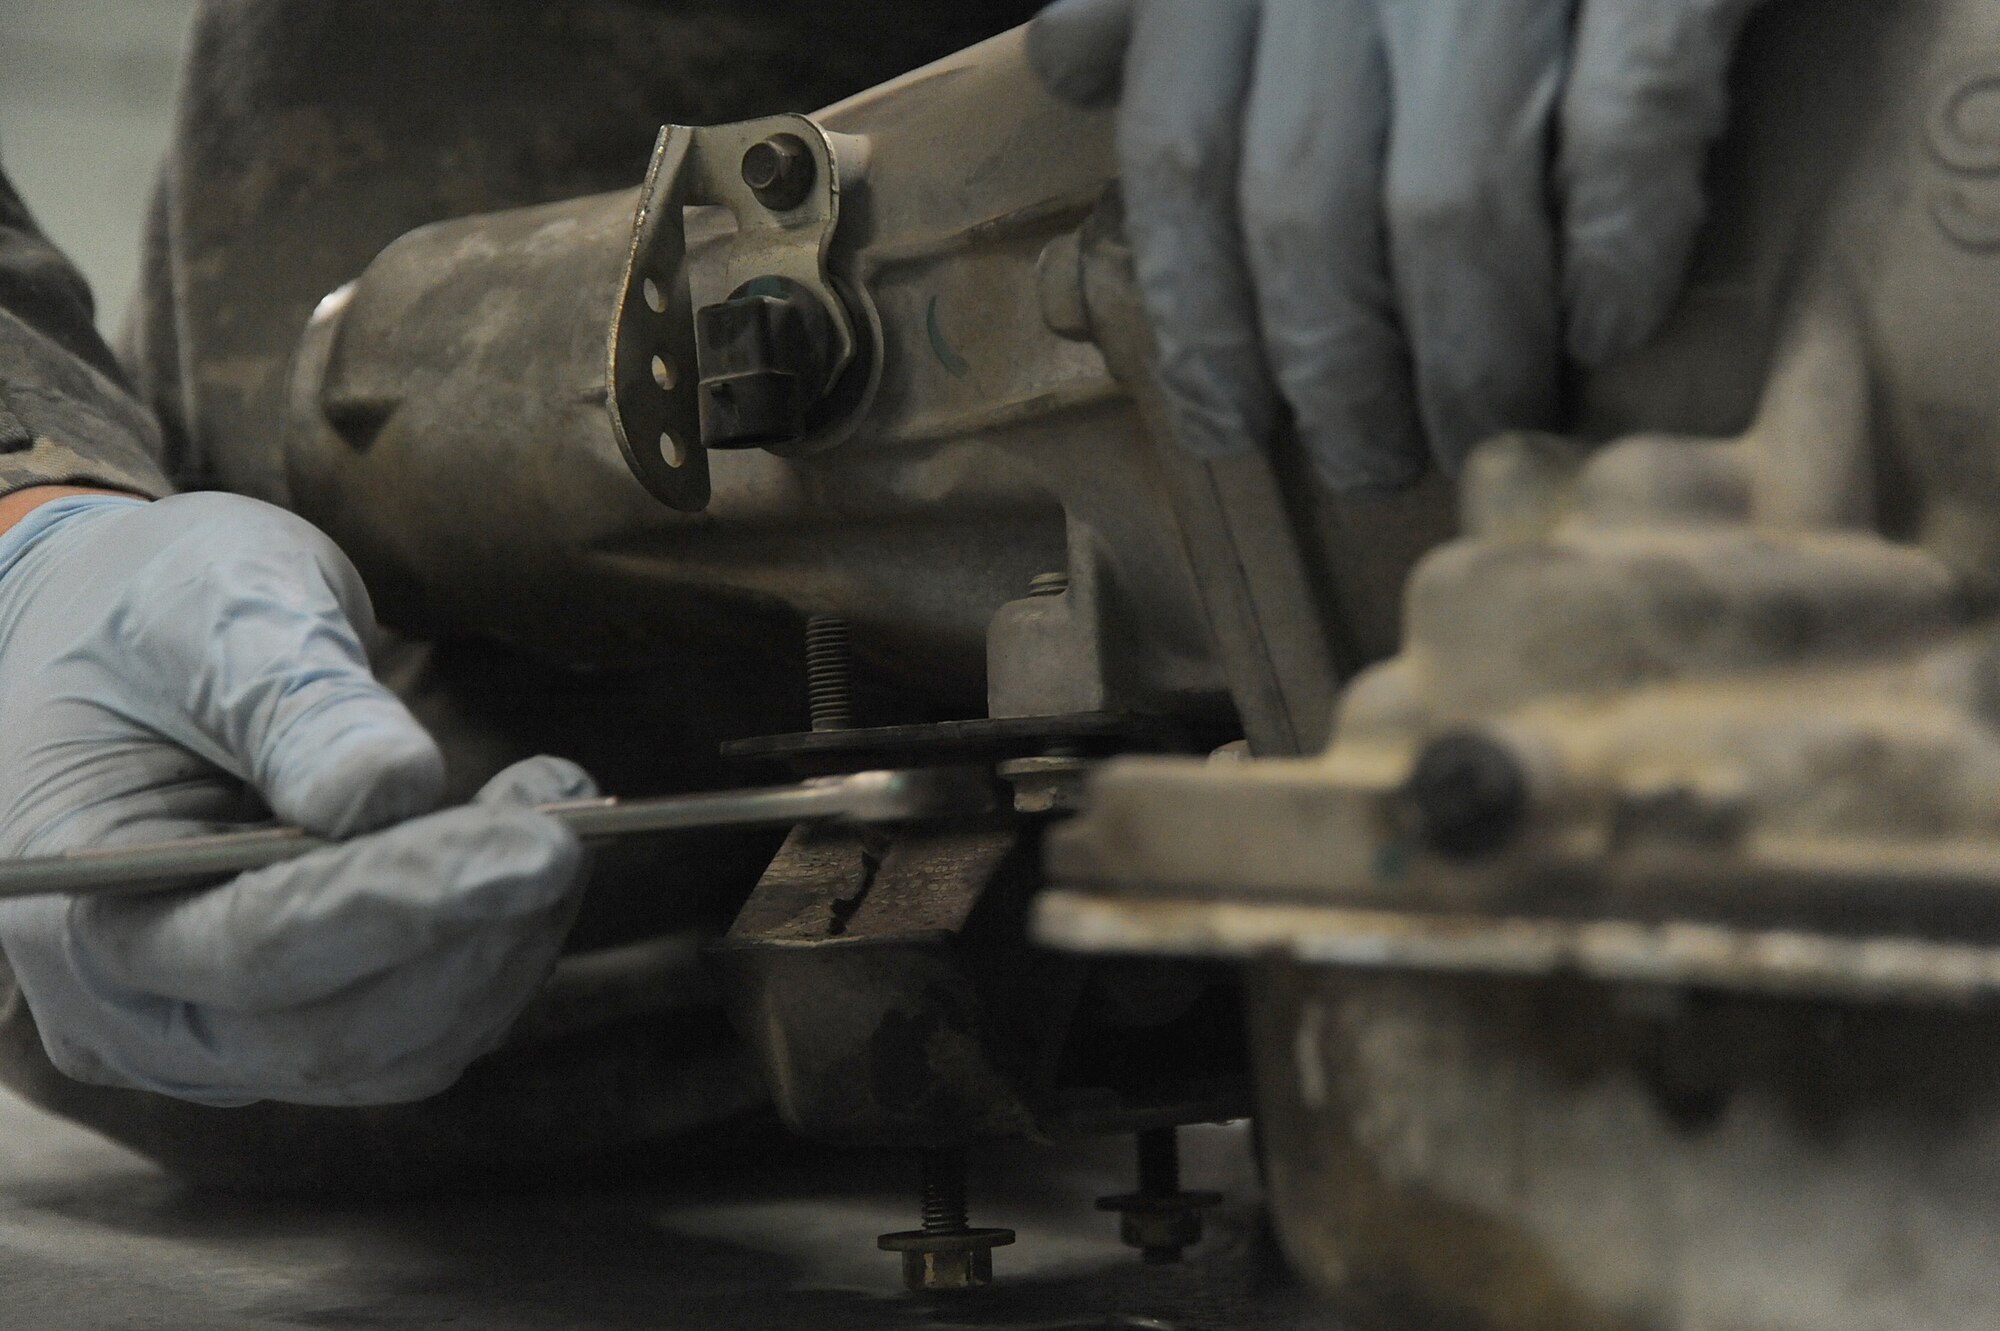 Senior Airman Michael Jakubec, 380th Expeditionary Logistics Readiness Squadron, vehicle maintenance, removes a bracket from an old transmission to be used on a new transmission for a Pontiac GTO, April 26 at an undisclosed location in Southwest Asia. The GTO is used as a chase car to help guide the U-2 Dragon Lady pilots during take-offs and landings. Airman Jakubec is deployed from Kadena AB, Japan and hails from Spanaway Wash.  (U.S. Air Force photo by Senior Airman Brian J. Ellis) (Released)